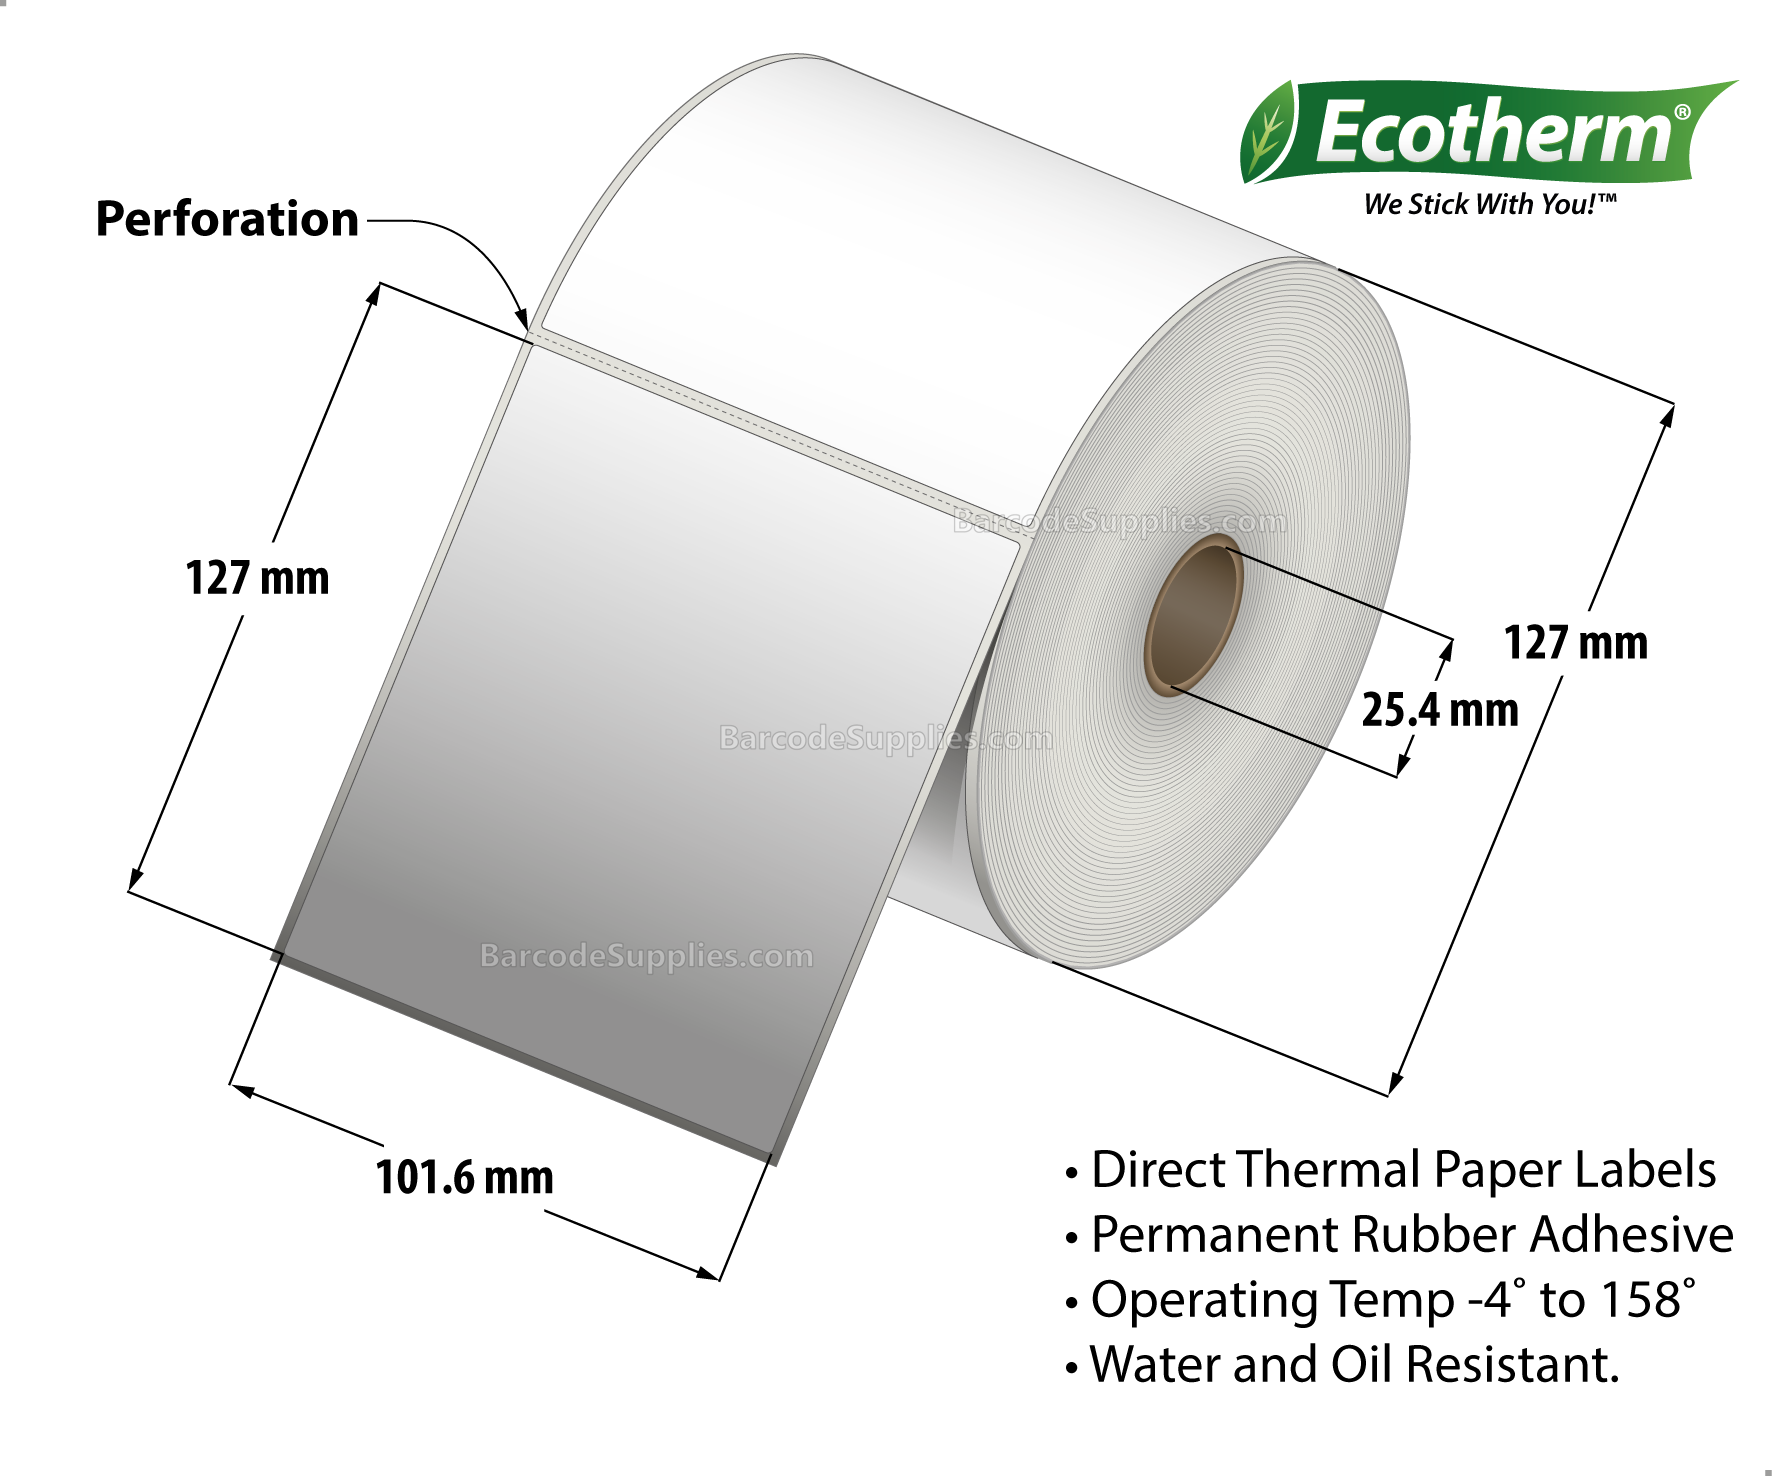 4 x 5 Direct Thermal White Labels With Rubber Adhesive - Perforated - 565 Labels Per Roll - Carton Of 6 Rolls - 3390 Labels Total - MPN: ECOTHERM15153-6